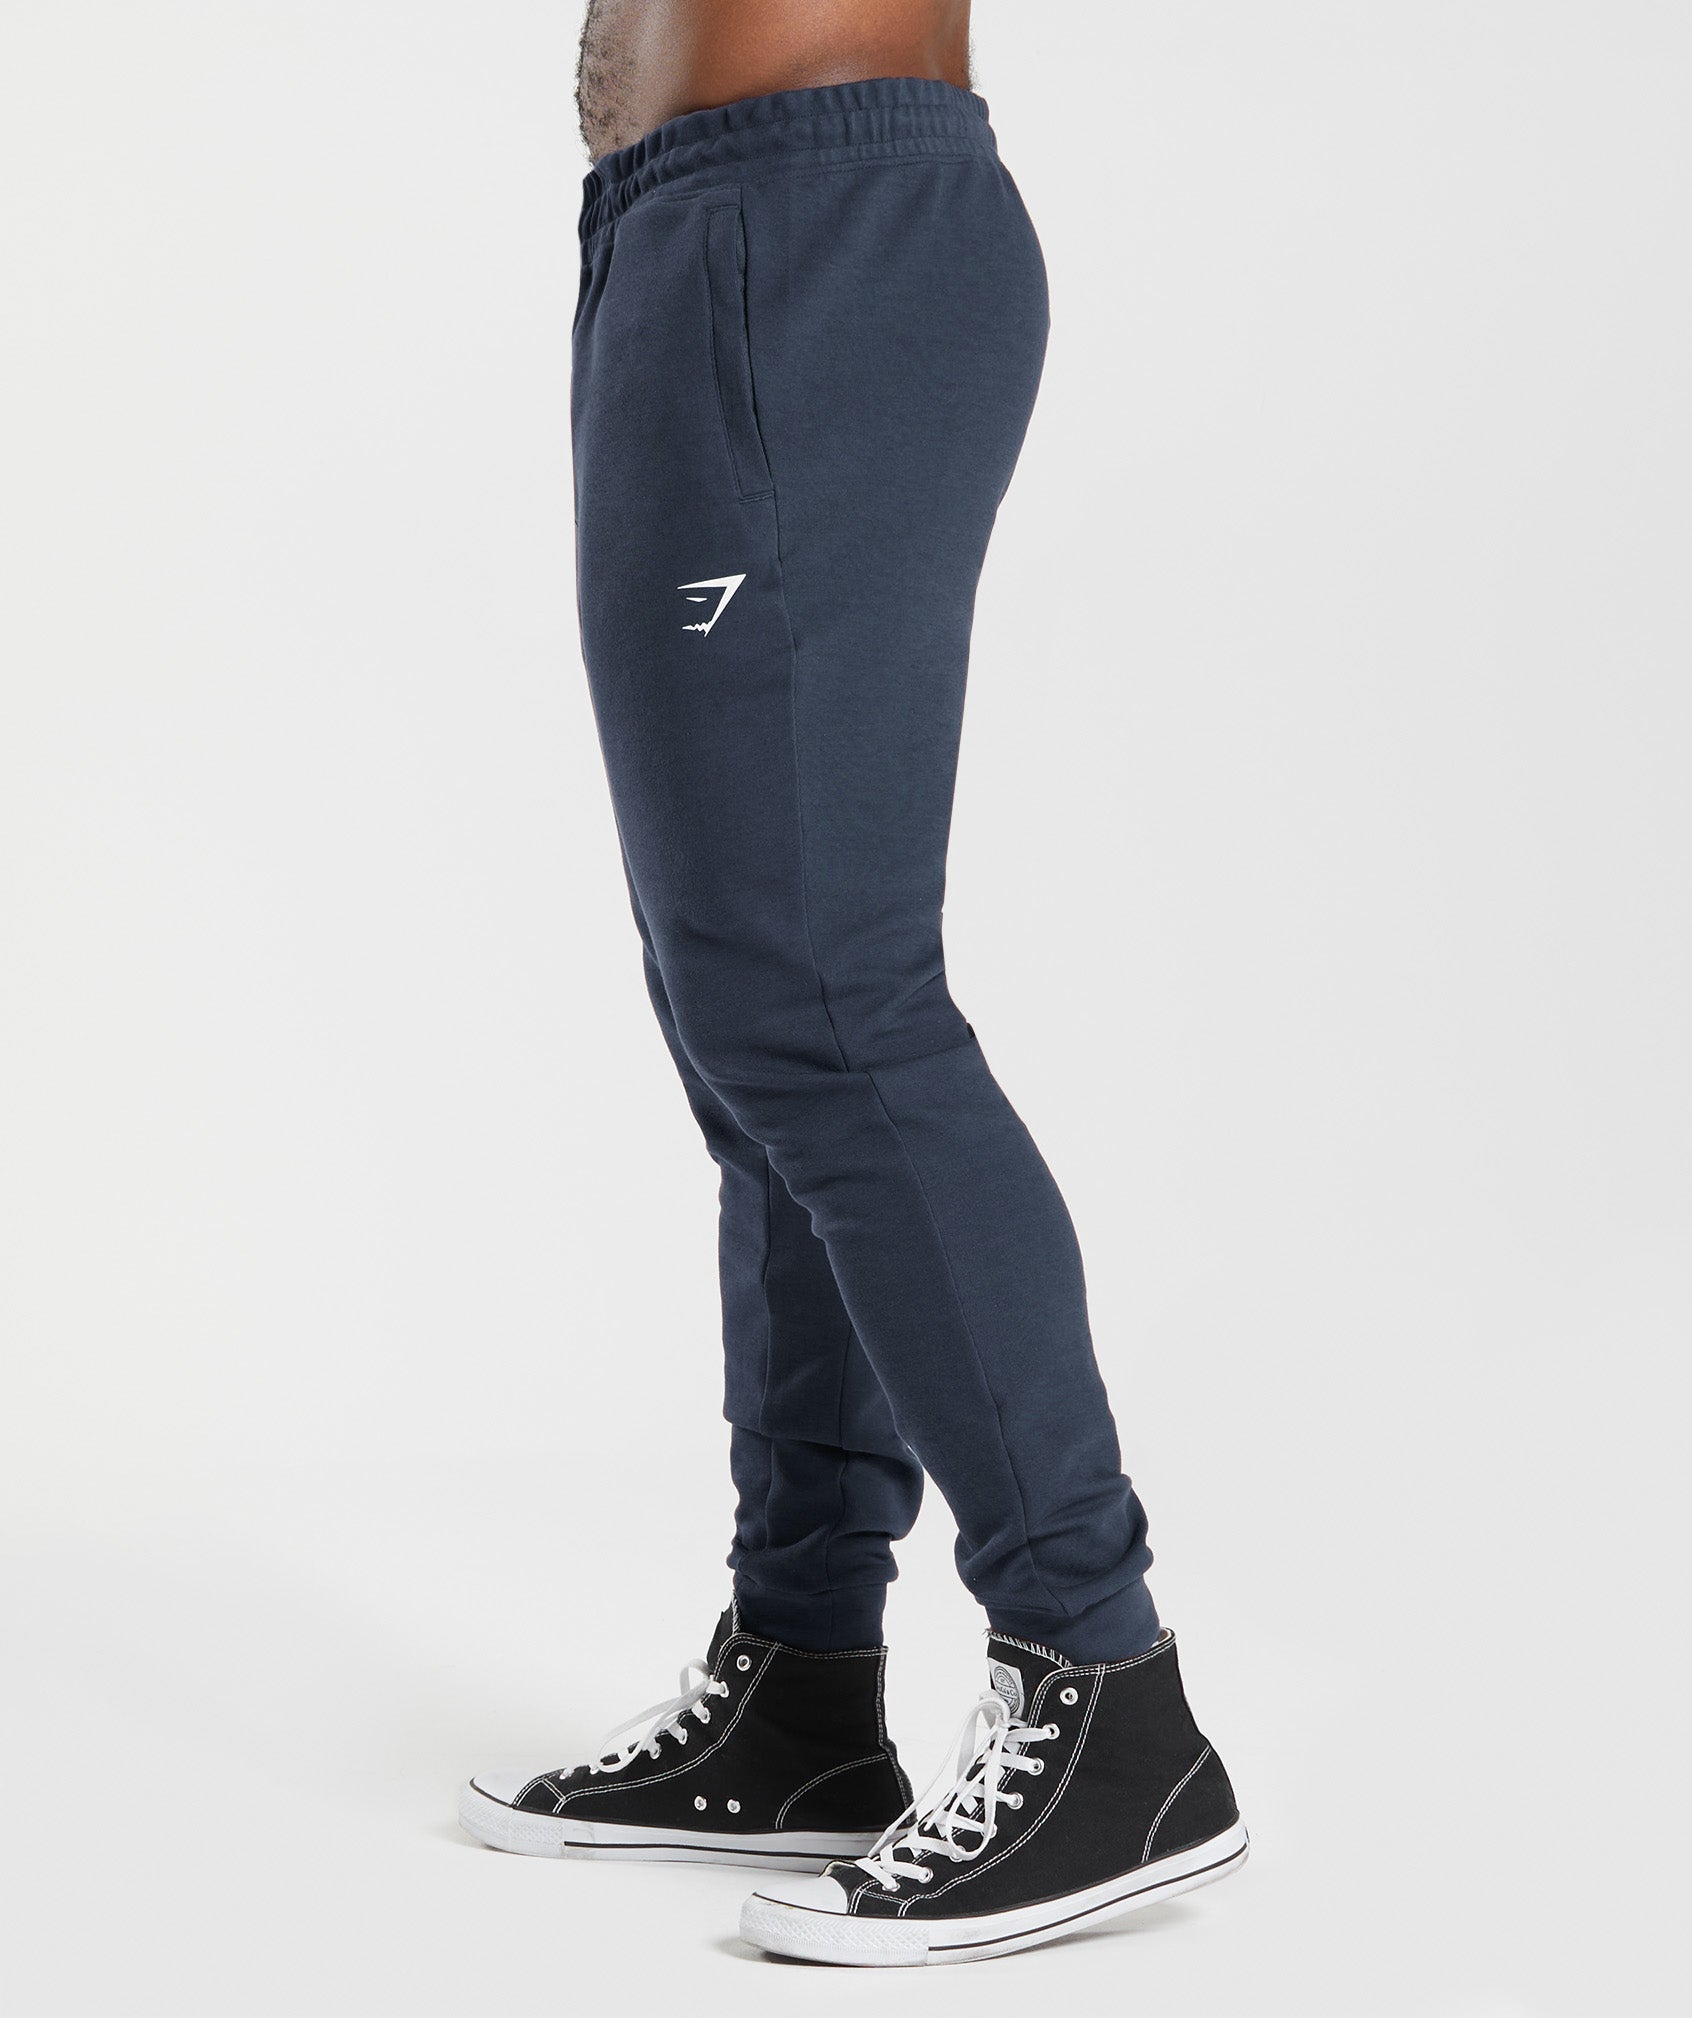 React Joggers in Navy - view 3